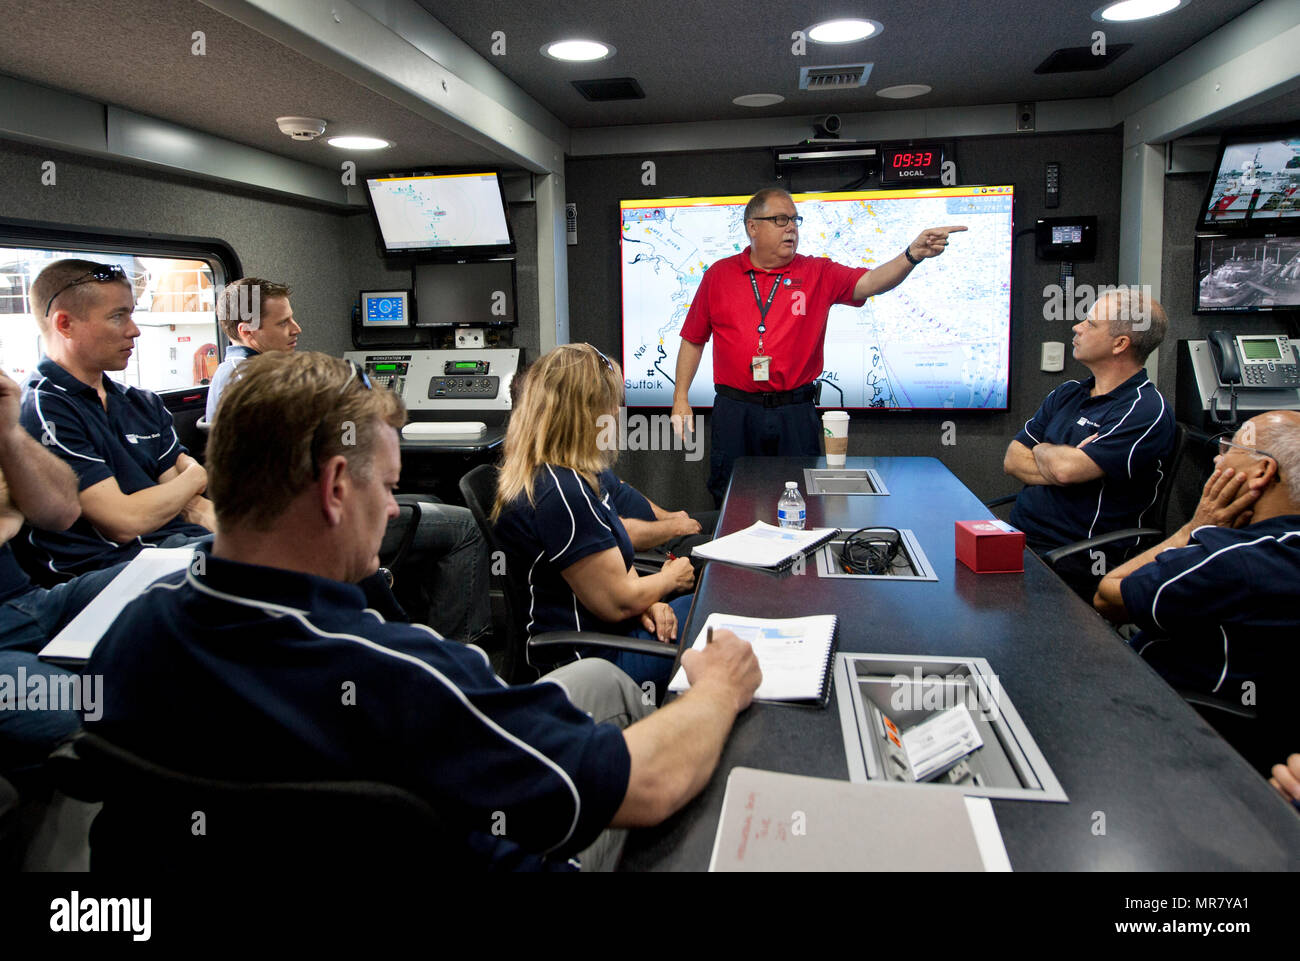 William Burket, director of emergency operations at the Virginia Port Authority in Norfolk, Virginia, explains the capabilities of the Port Authority Command 1 (PAC-1) to students from Queensland University of Technology in Brisbane, Queensland, Australia during their tour of Coast Guard Sector Hampton Roads in Portsmouth, Virginia, May 25, 2017. Burket described how the Coast Guard utilizes PAC-1 during interagency response operations. (U.S. Coast Guard photo by Petty Officer 3rd Class Corinne Zilnicki/Released) Stock Photo